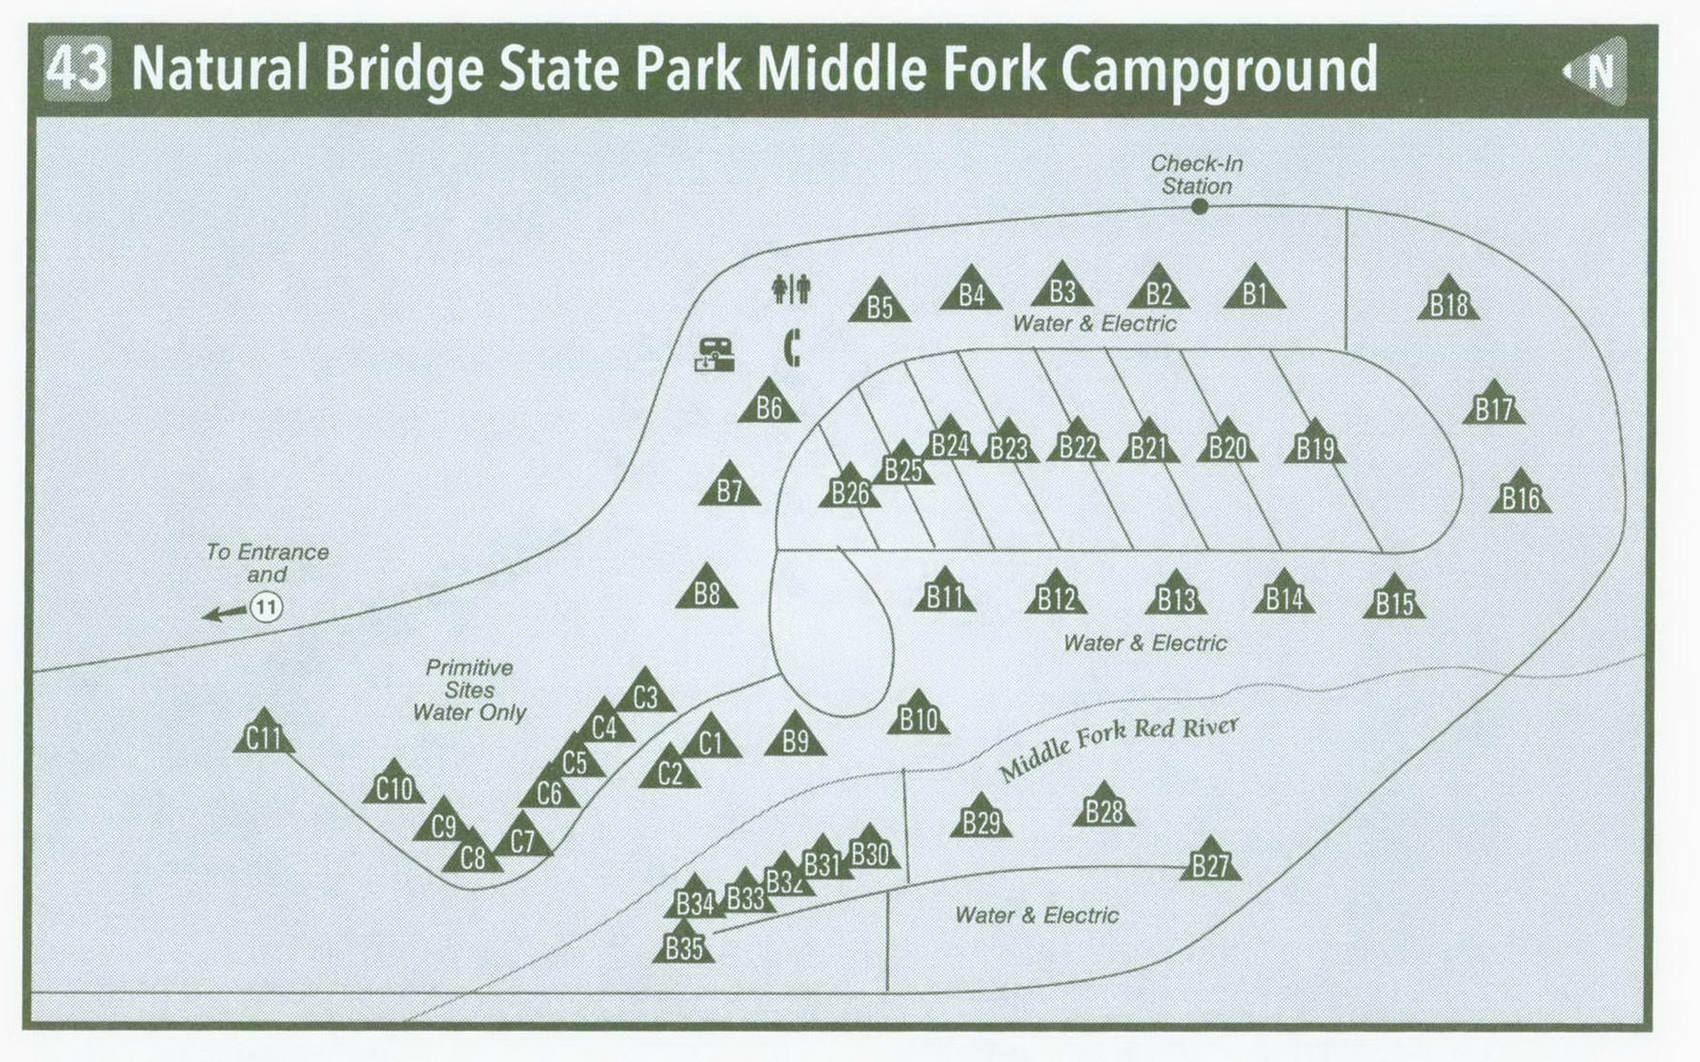 Natural Bridge State Park Middle Fork Campground